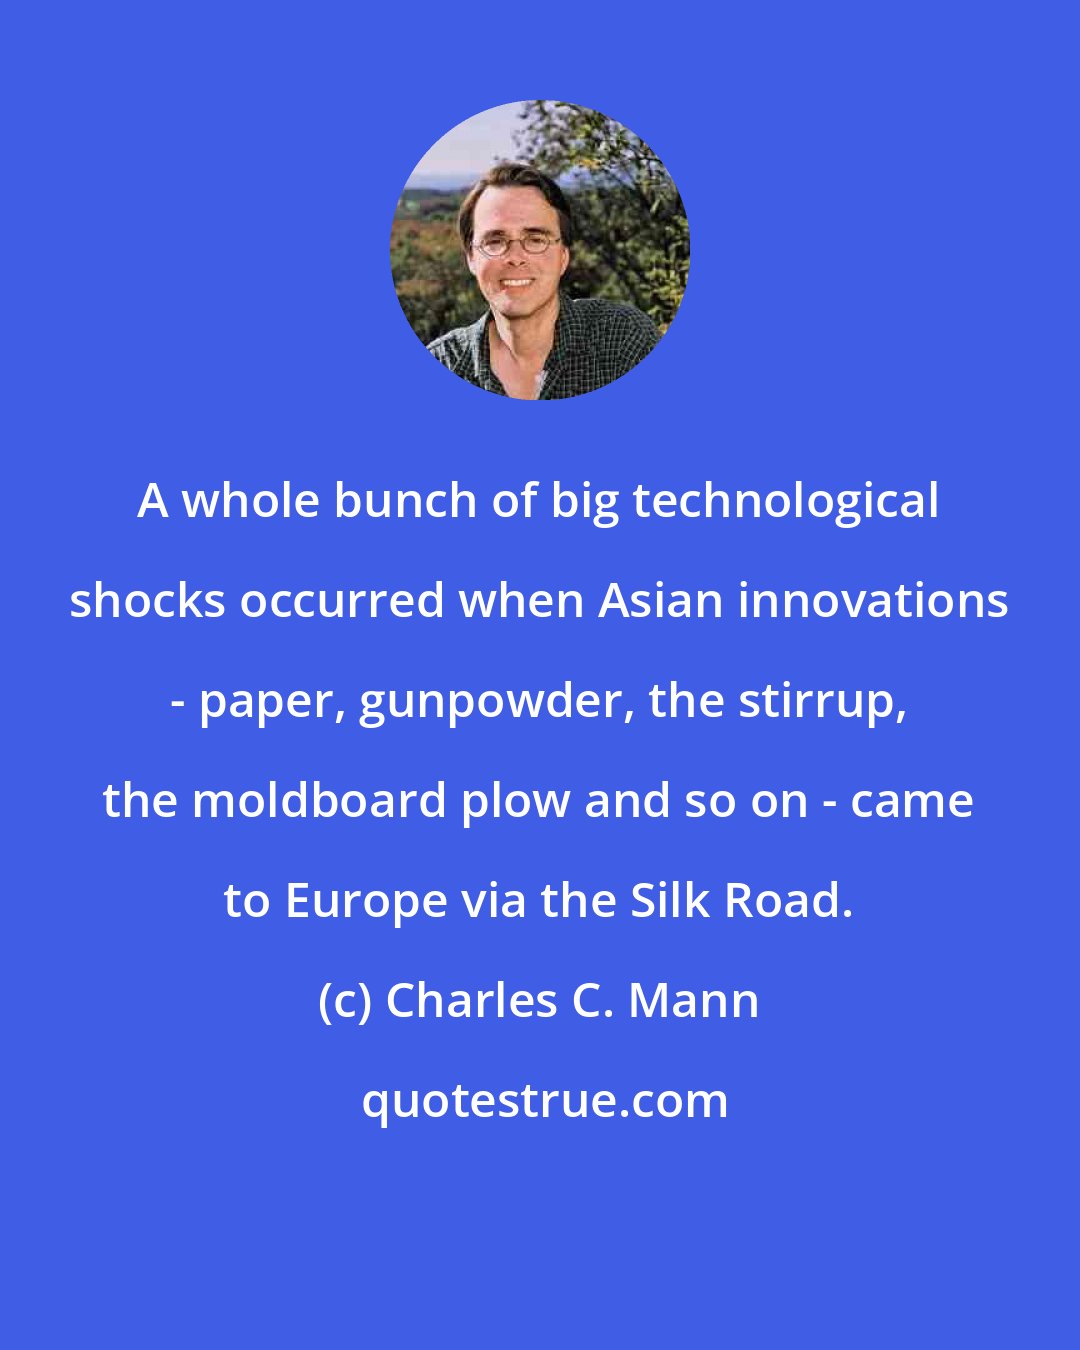 Charles C. Mann: A whole bunch of big technological shocks occurred when Asian innovations - paper, gunpowder, the stirrup, the moldboard plow and so on - came to Europe via the Silk Road.